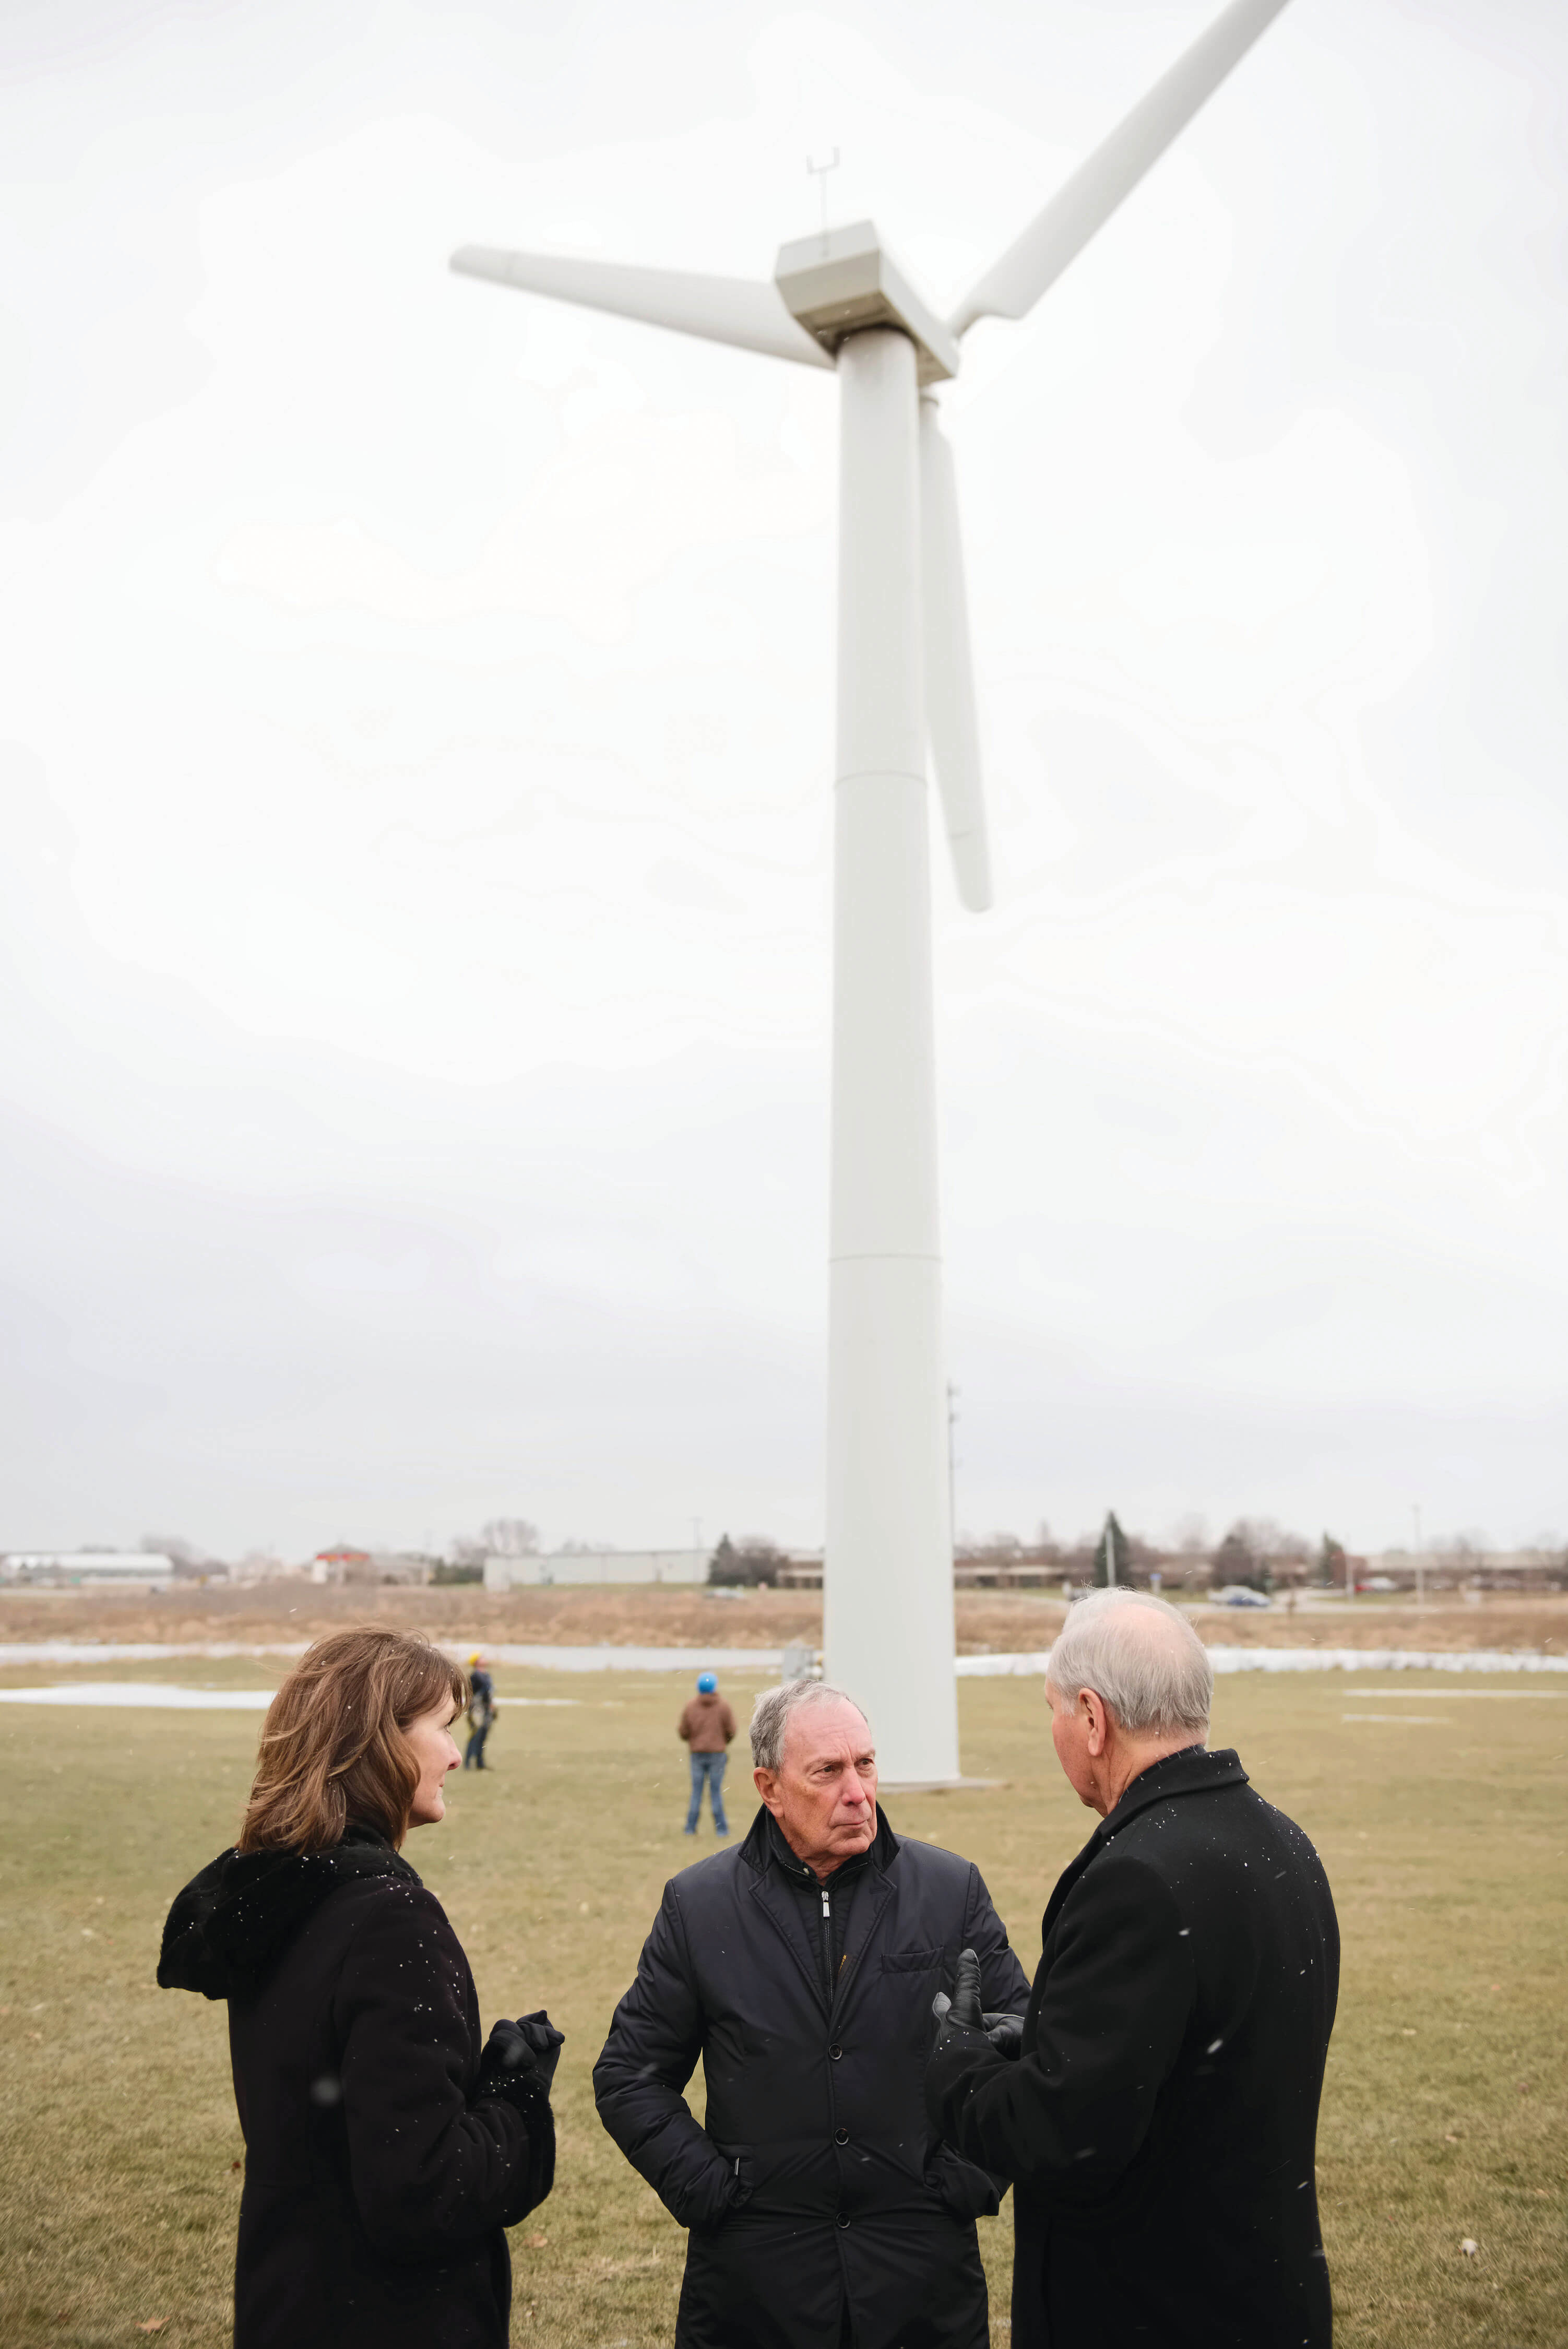 Mike Bloomberg visiting Des Moines Area Community College’s wind energy program in Iowa.